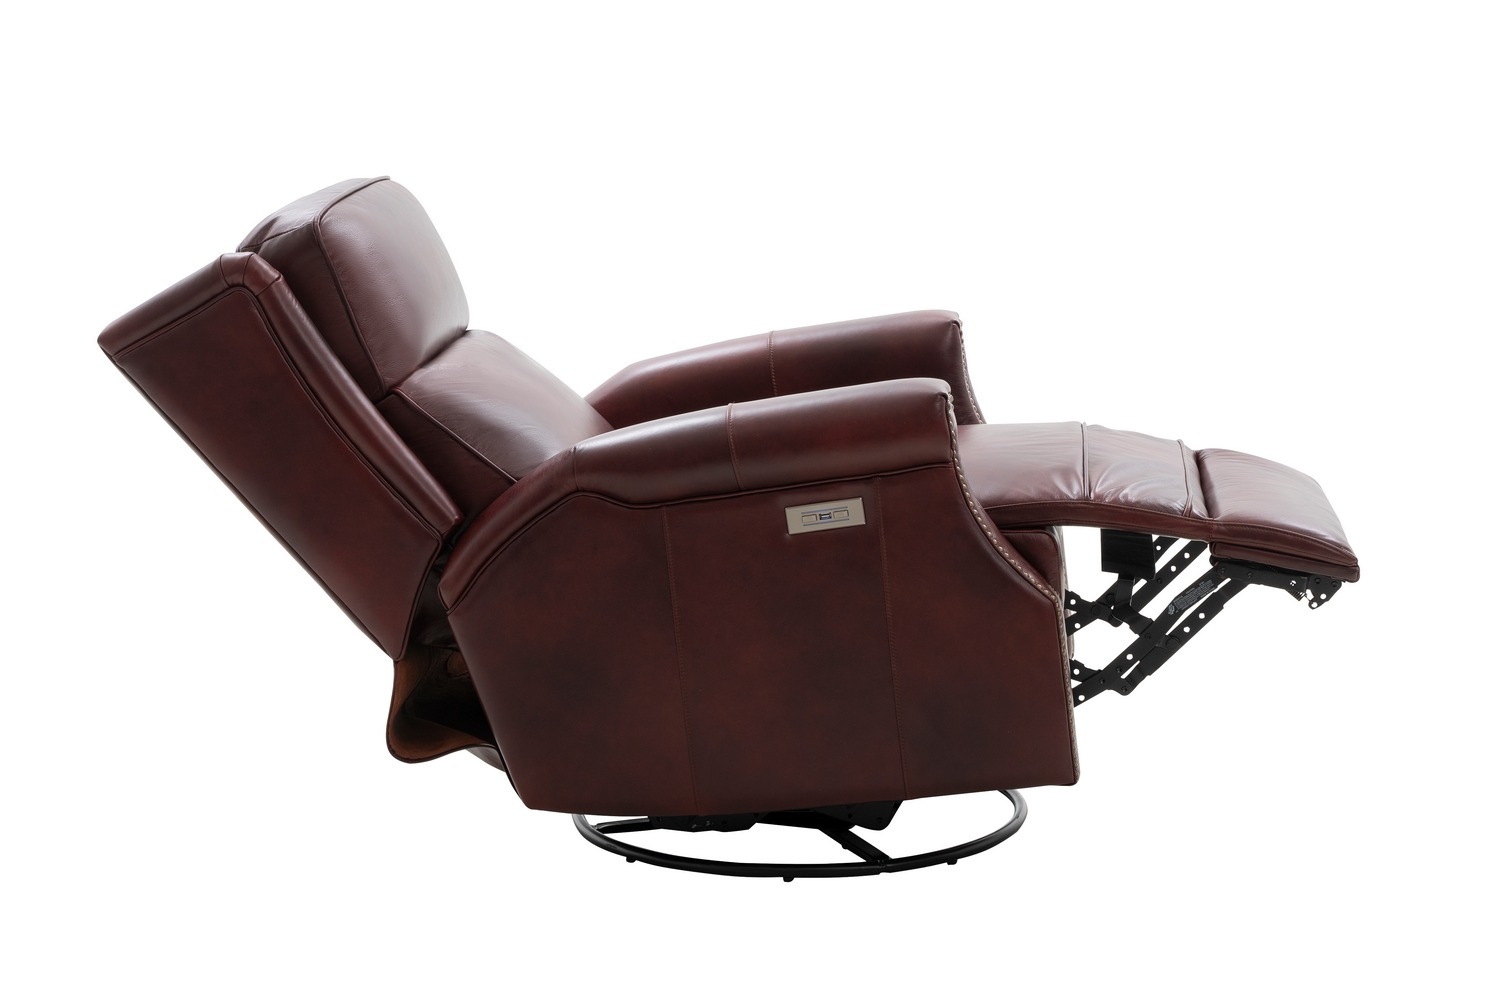 Barcalounger Brookmore Swivel Glider Recliner Chair with Power Recline and Power Head Rest - Emerson Sangria/Top Grain Leather